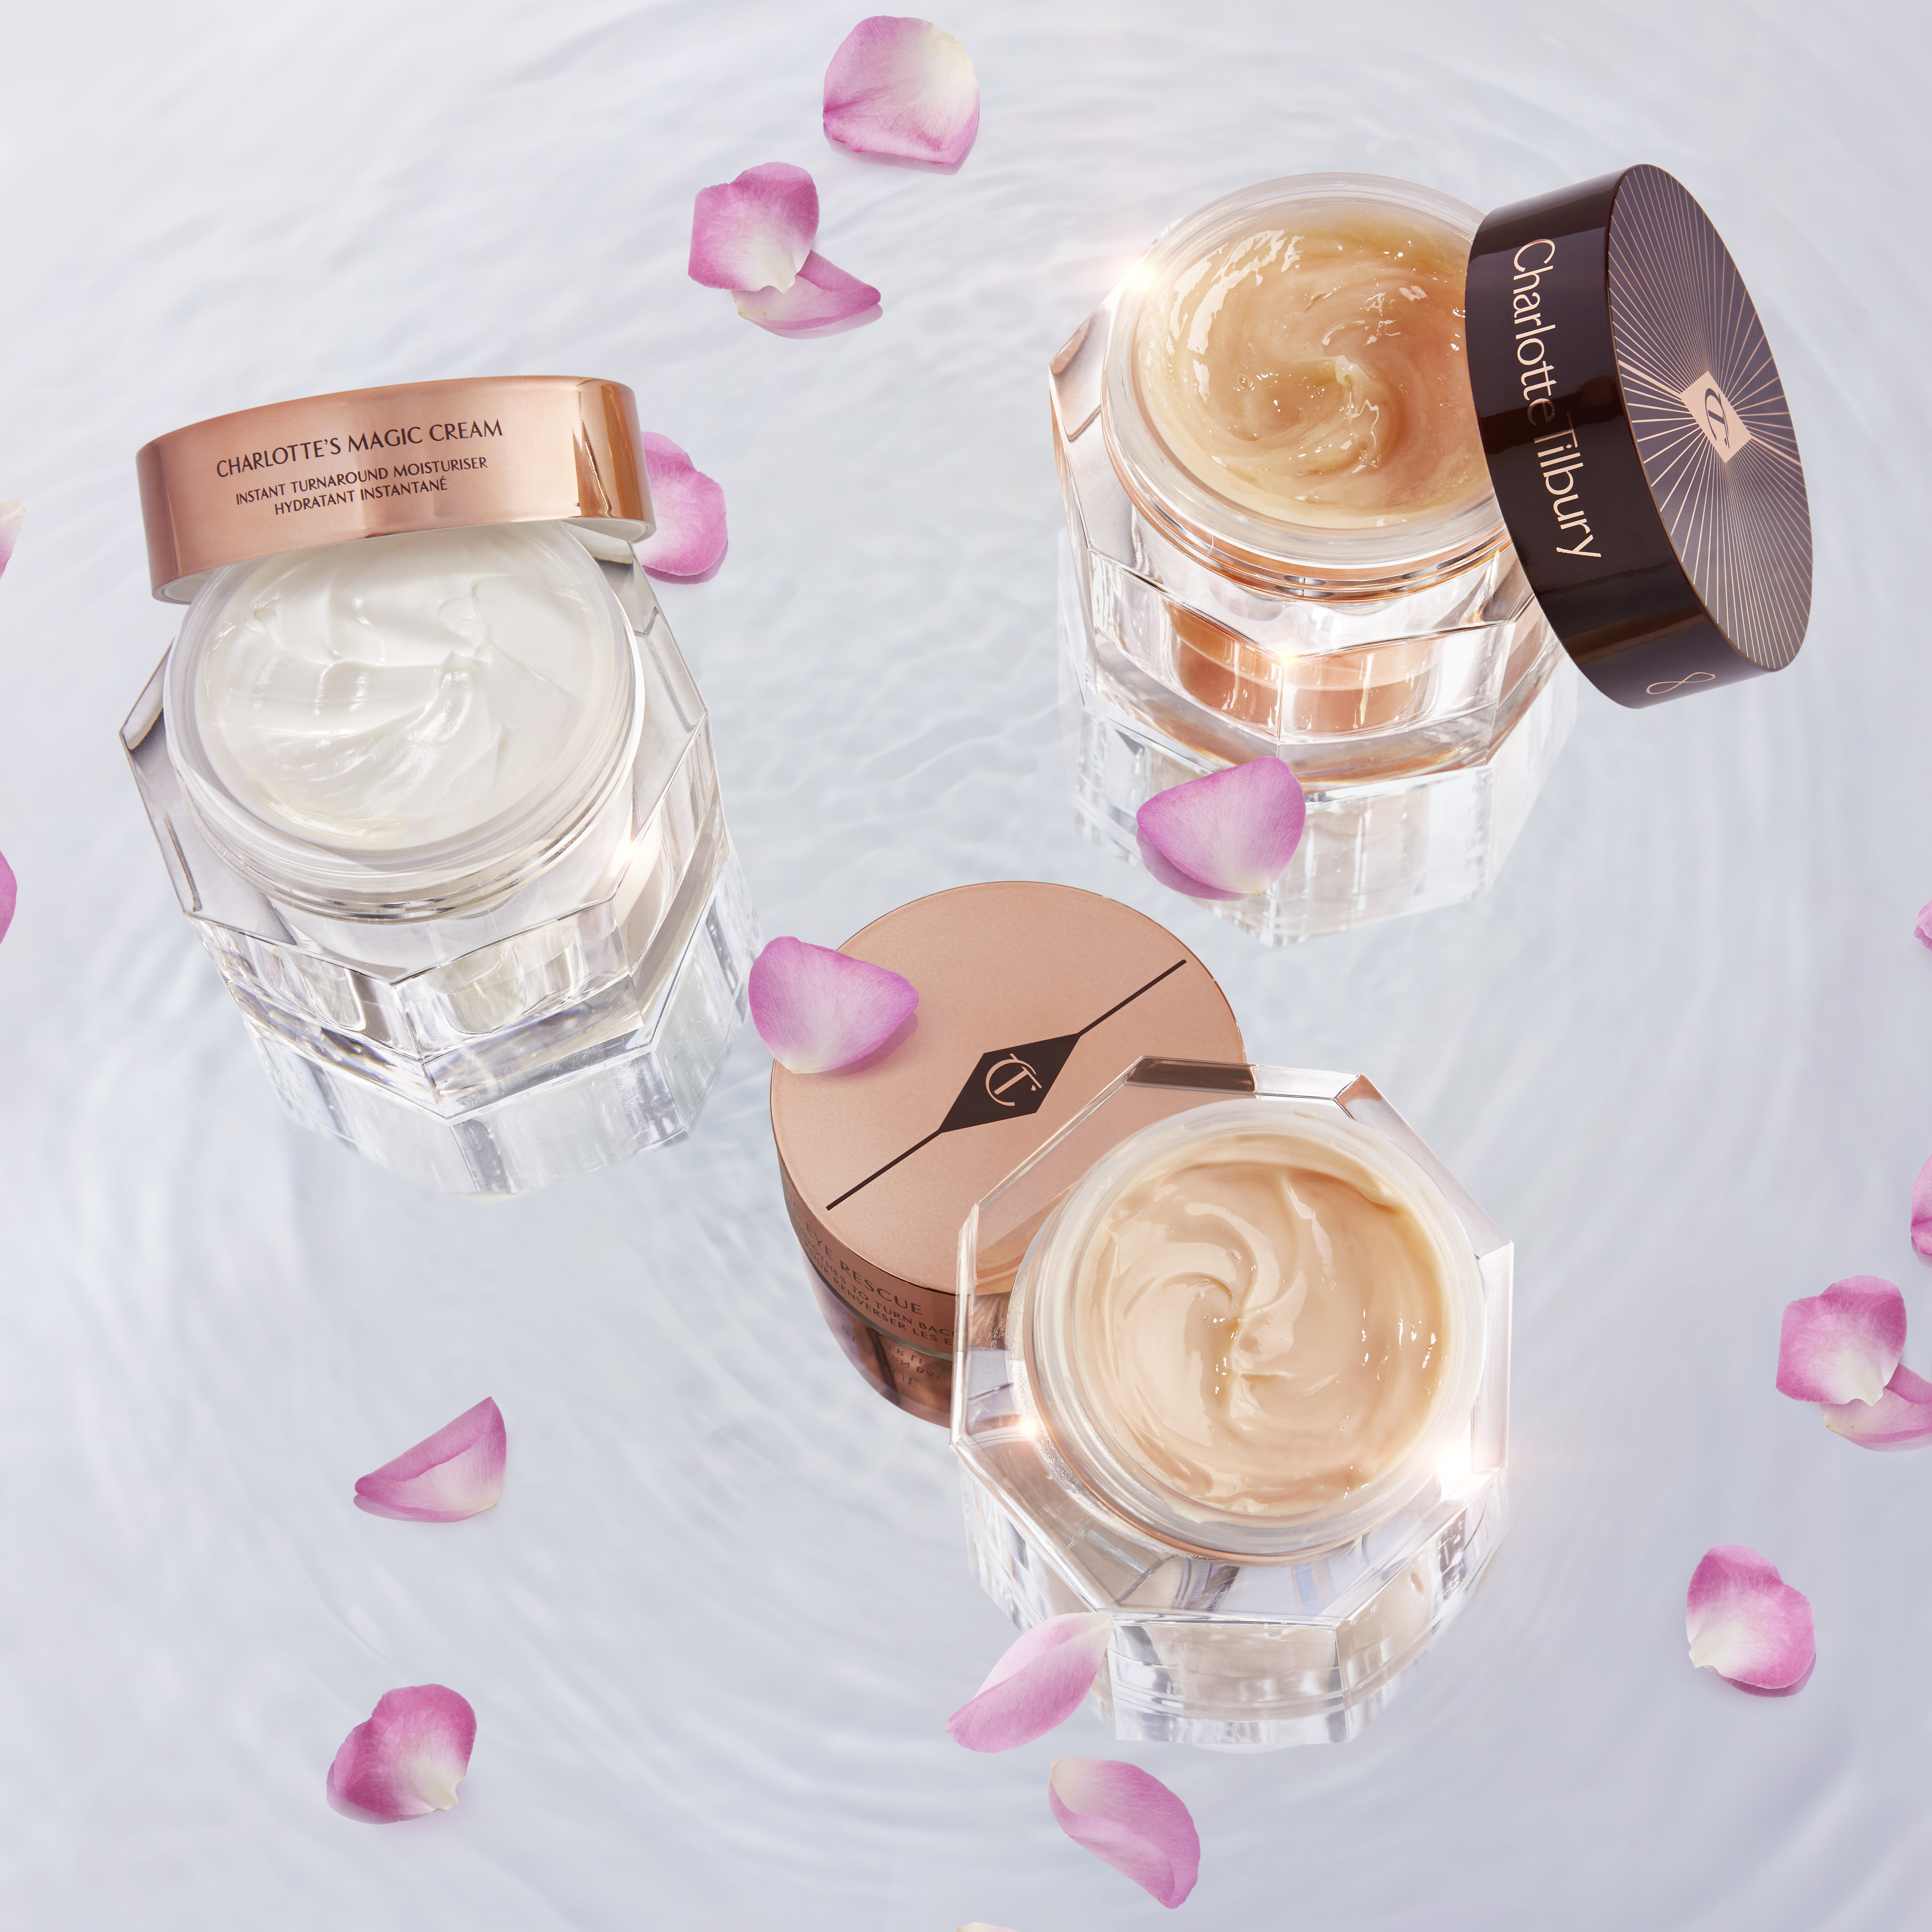 Pearly-white face cream in an open glass jar with a gold-coloured lid, peach-coloured thick night cream in an open glass jar with a dark-brown-coloured lid, and champagne-coloured eye cream in an open, petite glass jar with a gold-coloured lid, all three on top of crystal-clear water with rose petals falling down.